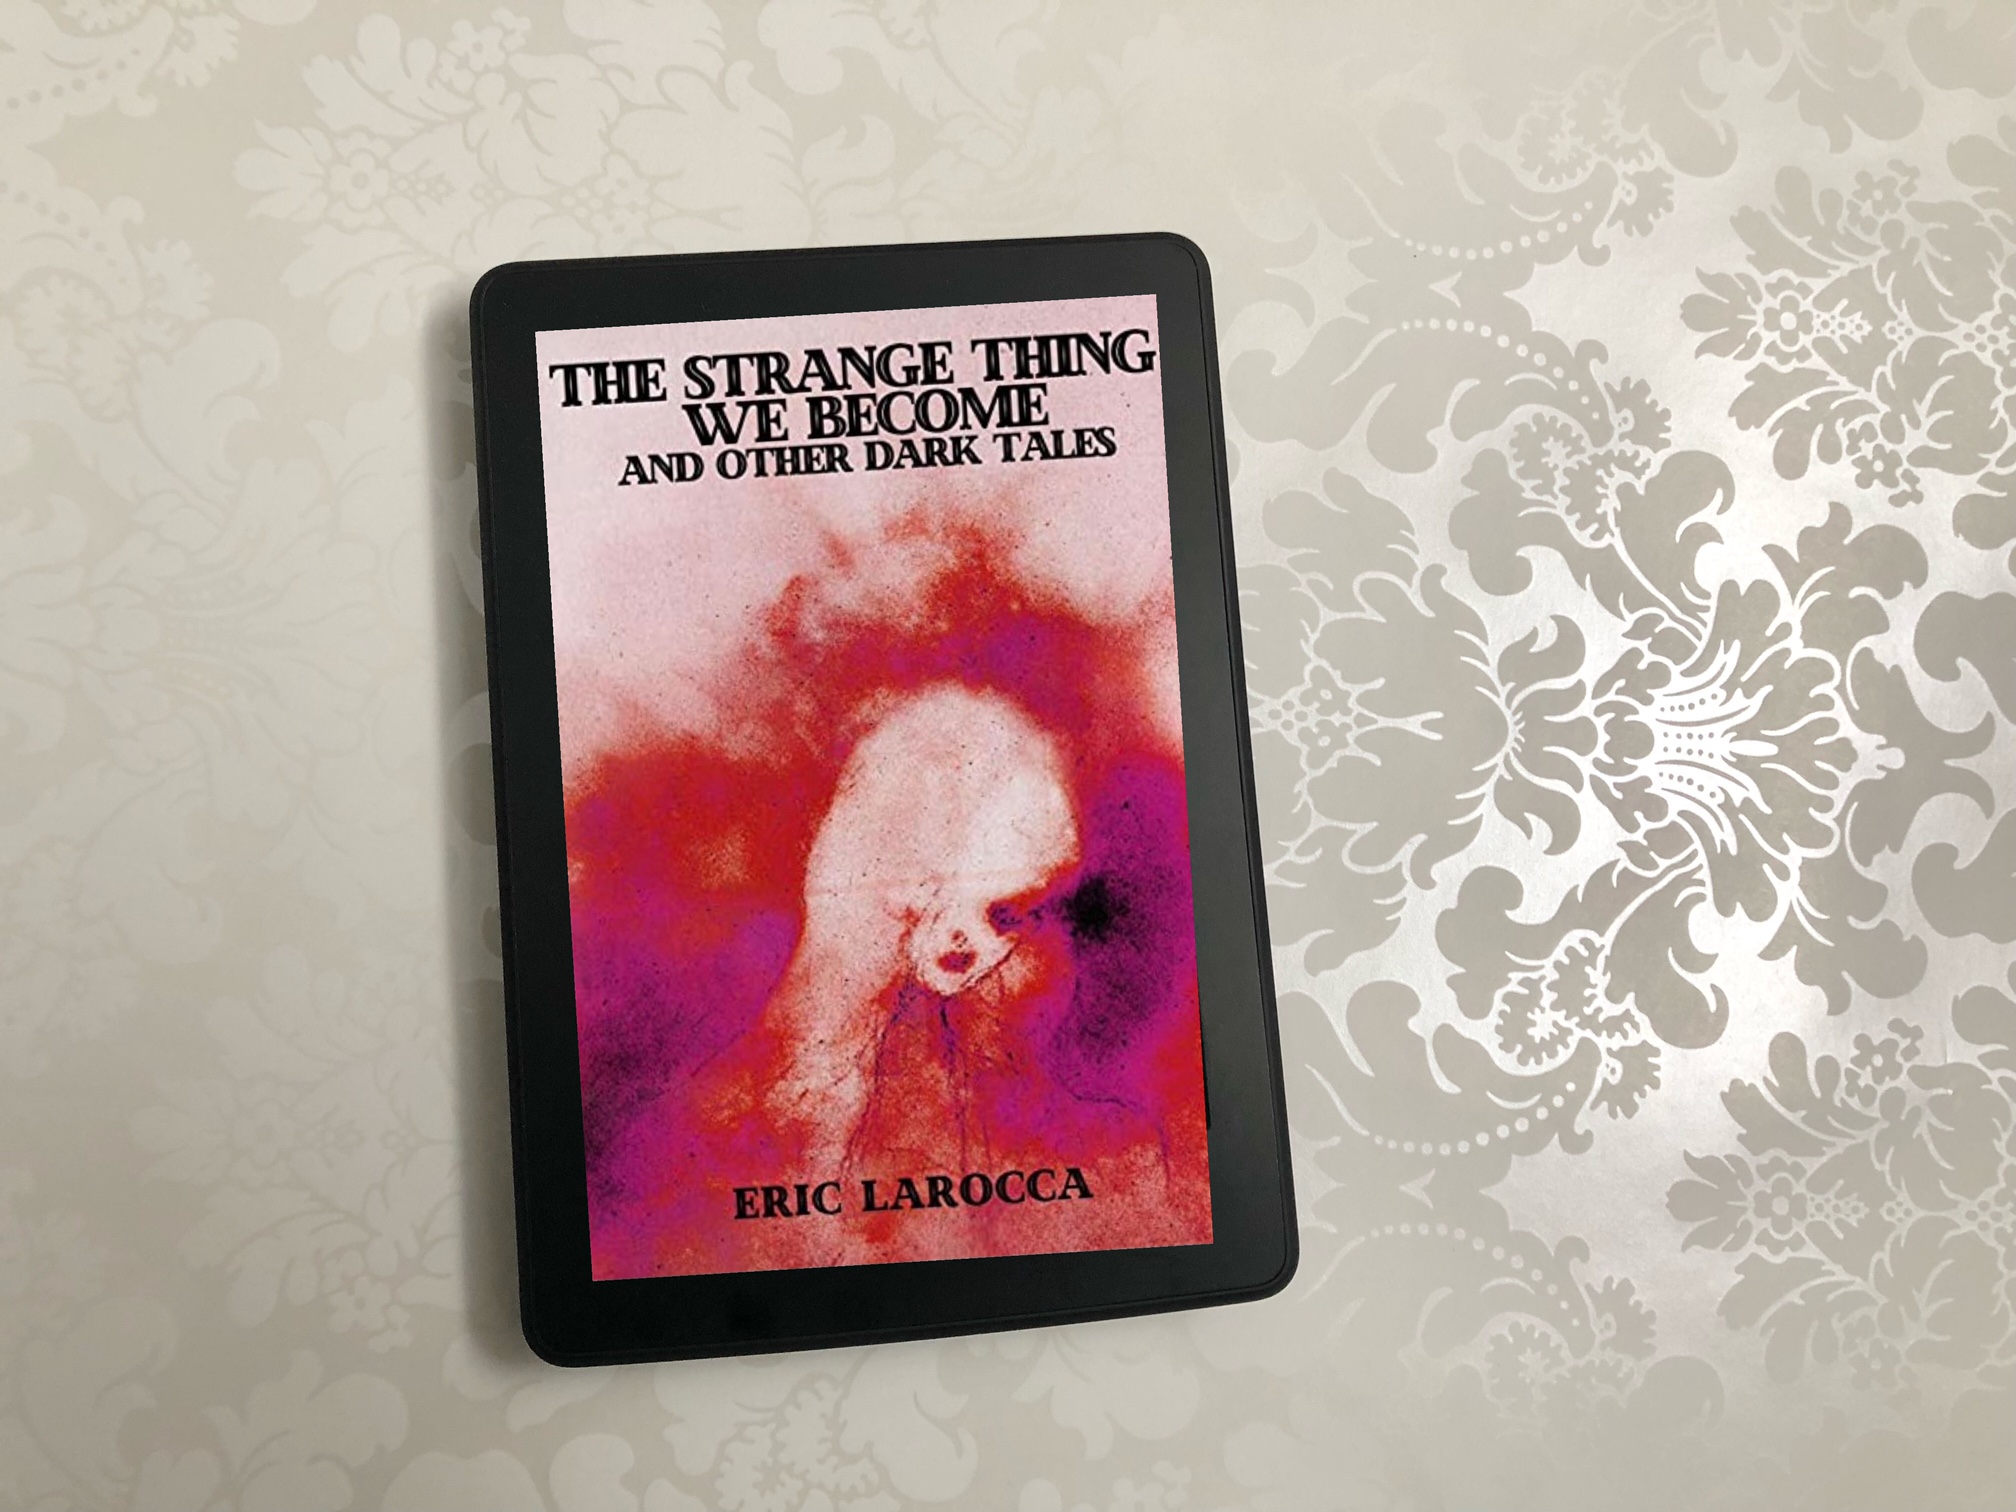 The Strange Thing We Become and Other Dark Tales by Eric LaRocca book photo by Erica Robyn Reads